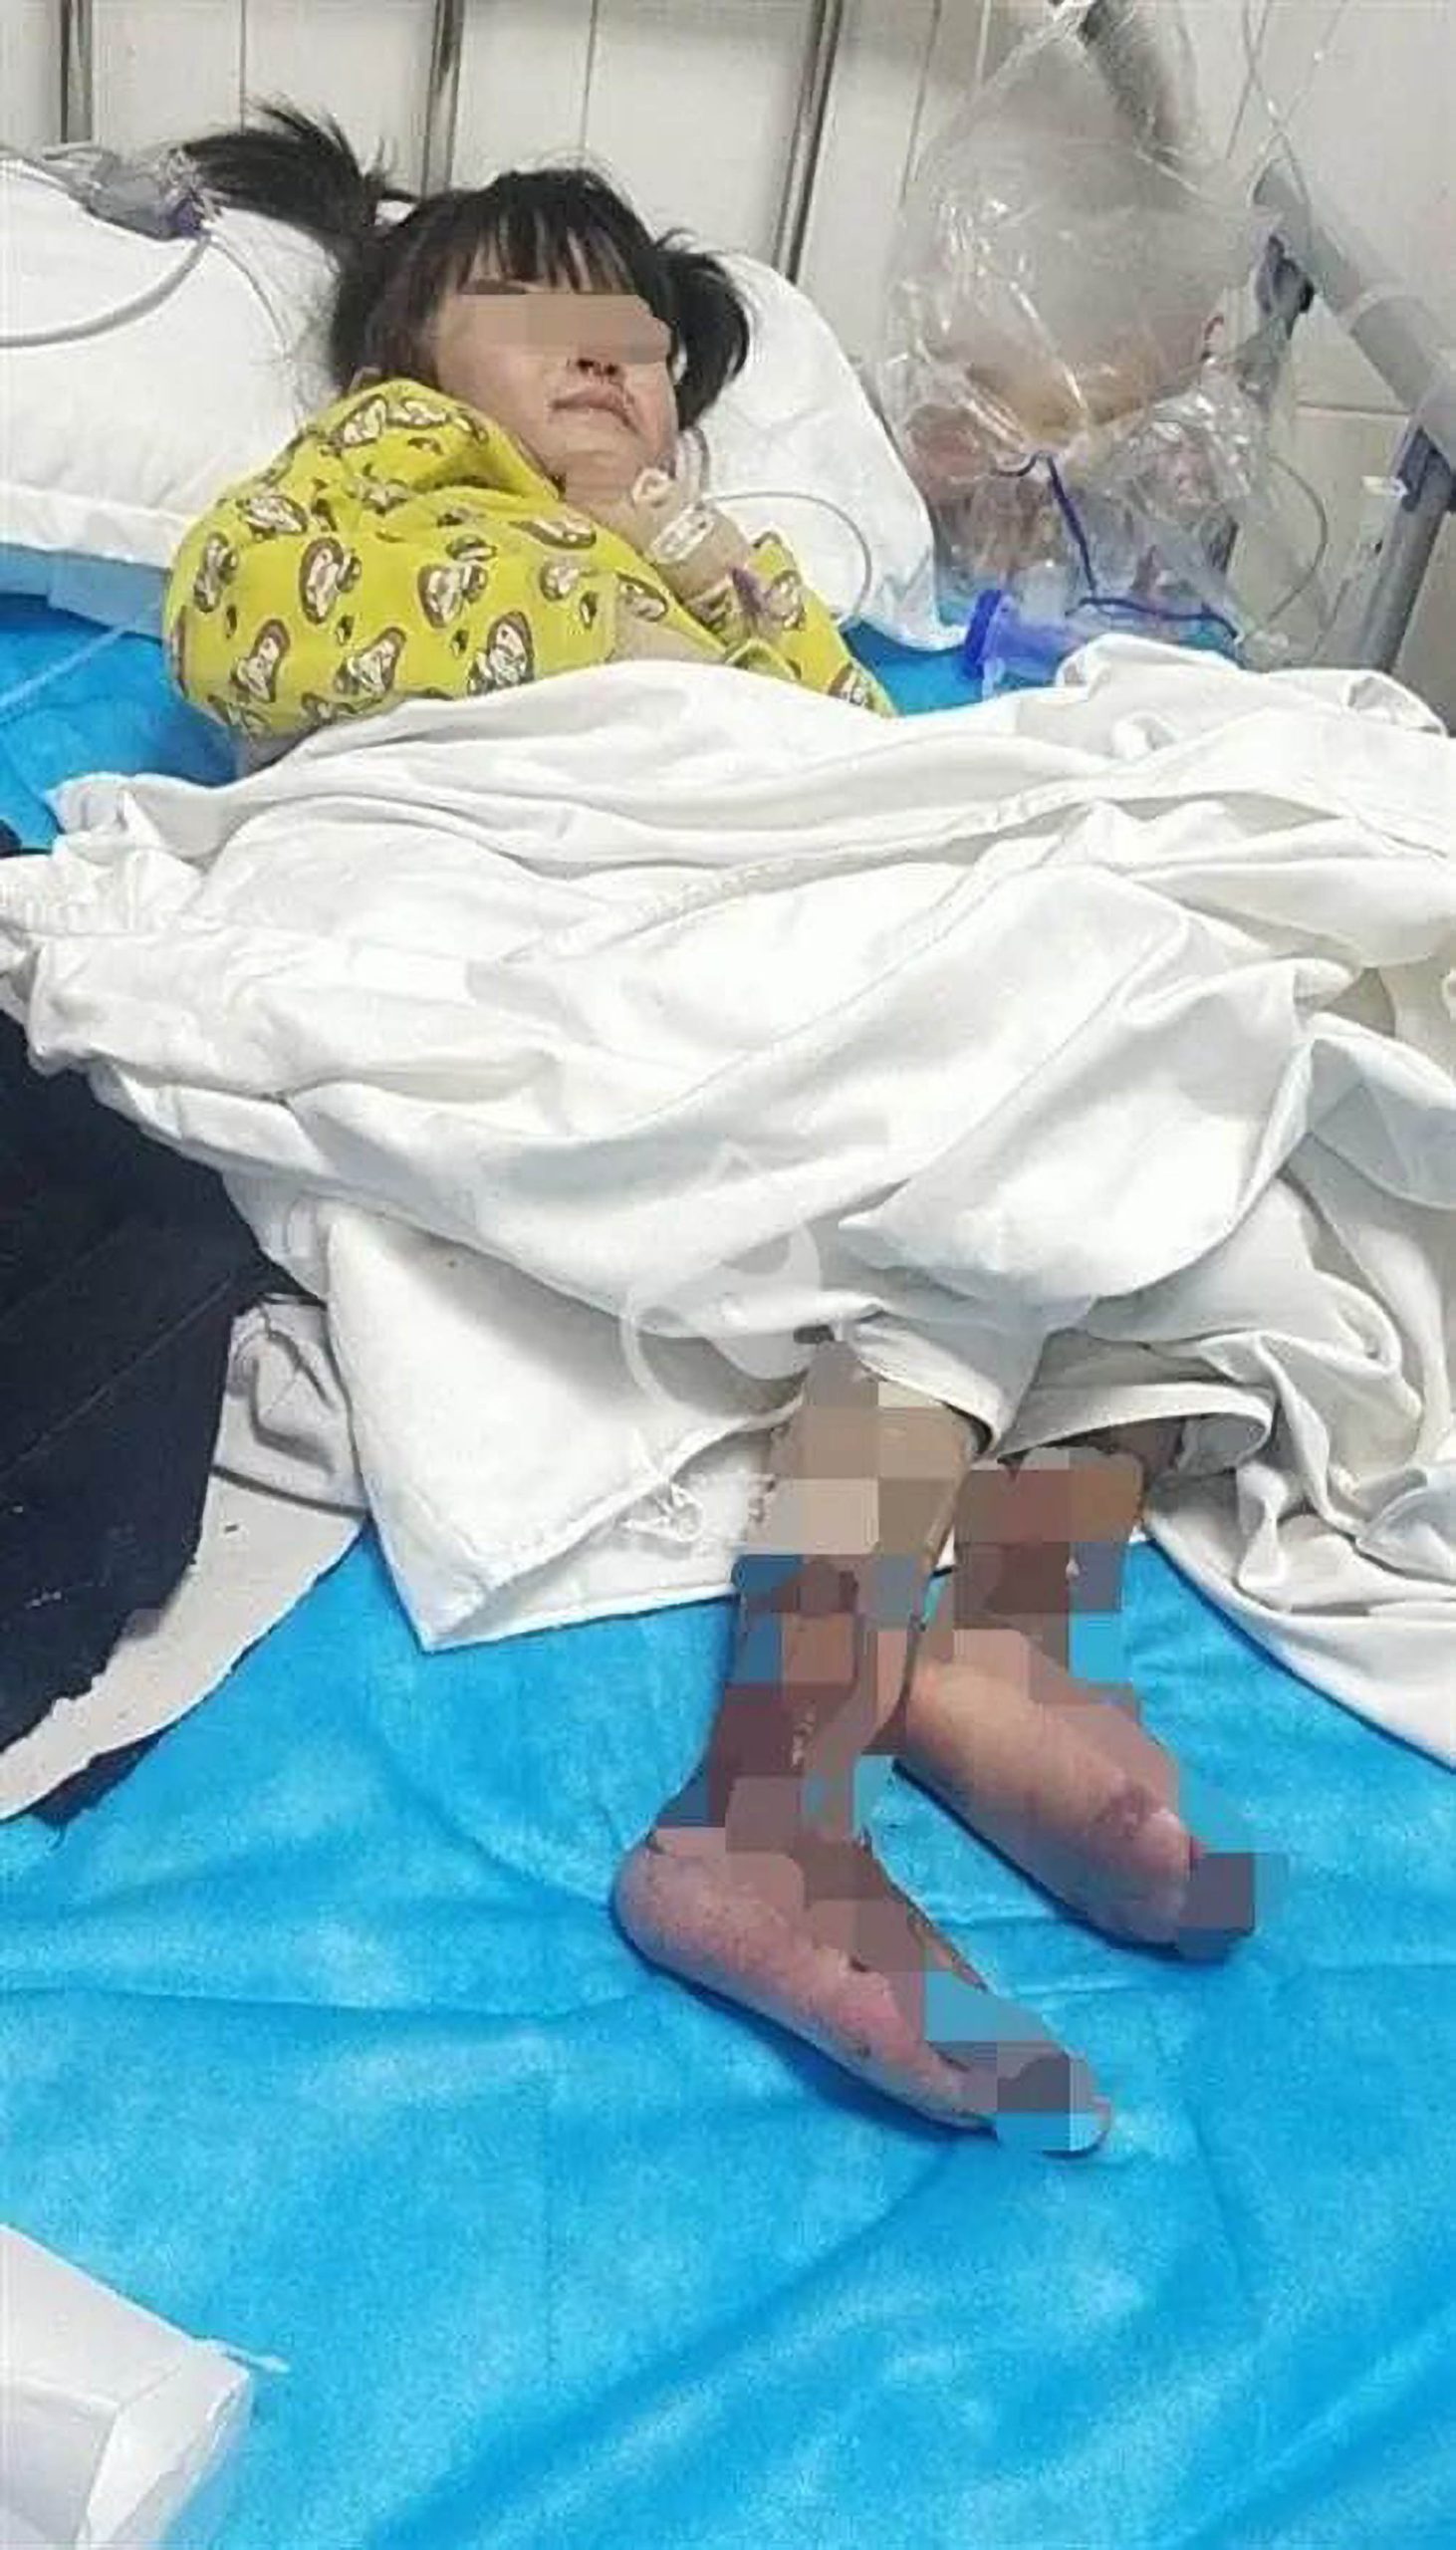 Read more about the article Girl, 4, Narrowly Avoids Having Both Legs Amputated After Stepmum Burns Her With Boiling Water